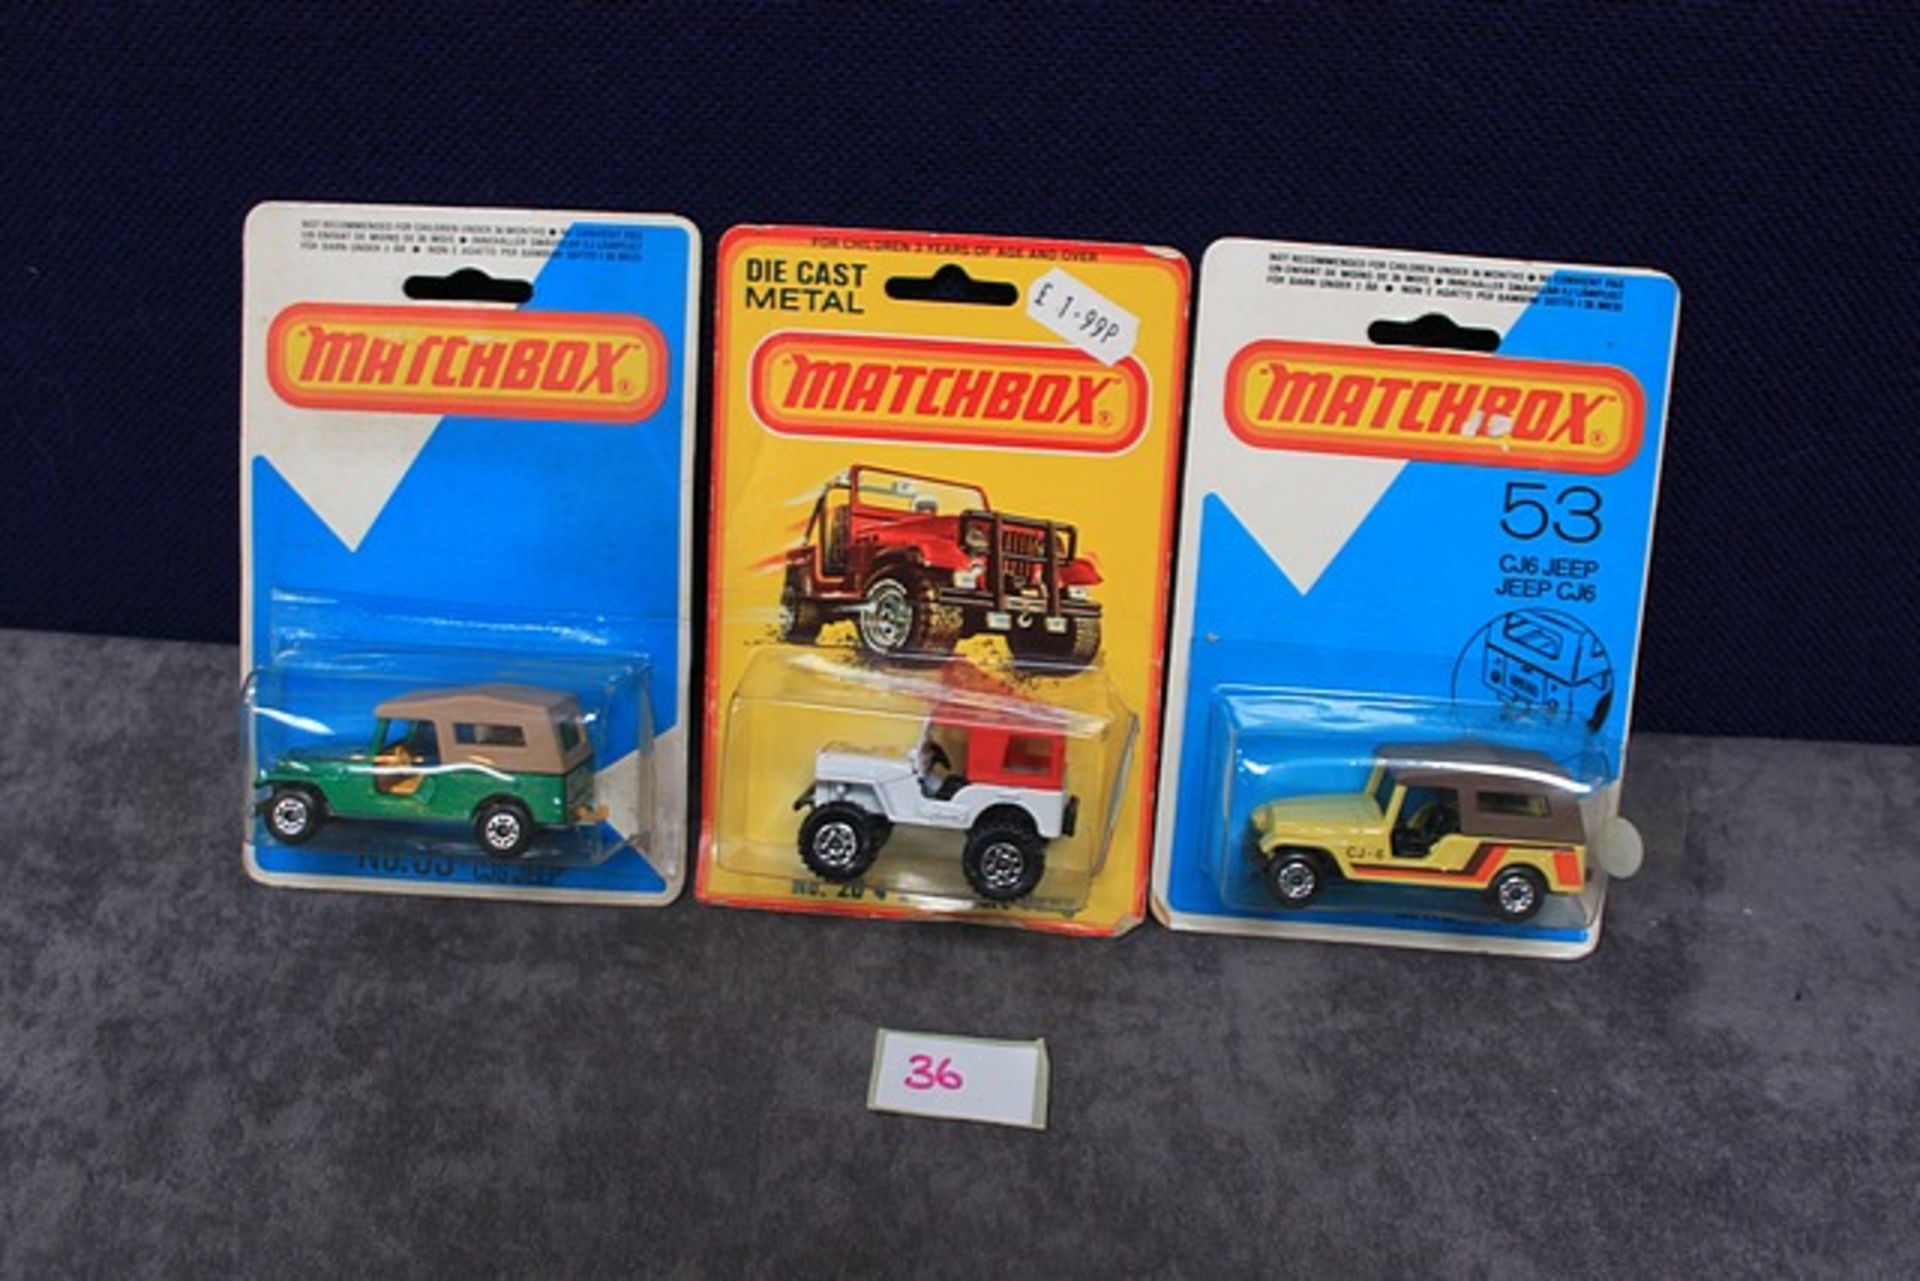 3x Matchbox Diecast Jeeps All On Cards Comprising Of; Number 53 CJ6 Metallic Green, Number 53 CJ6